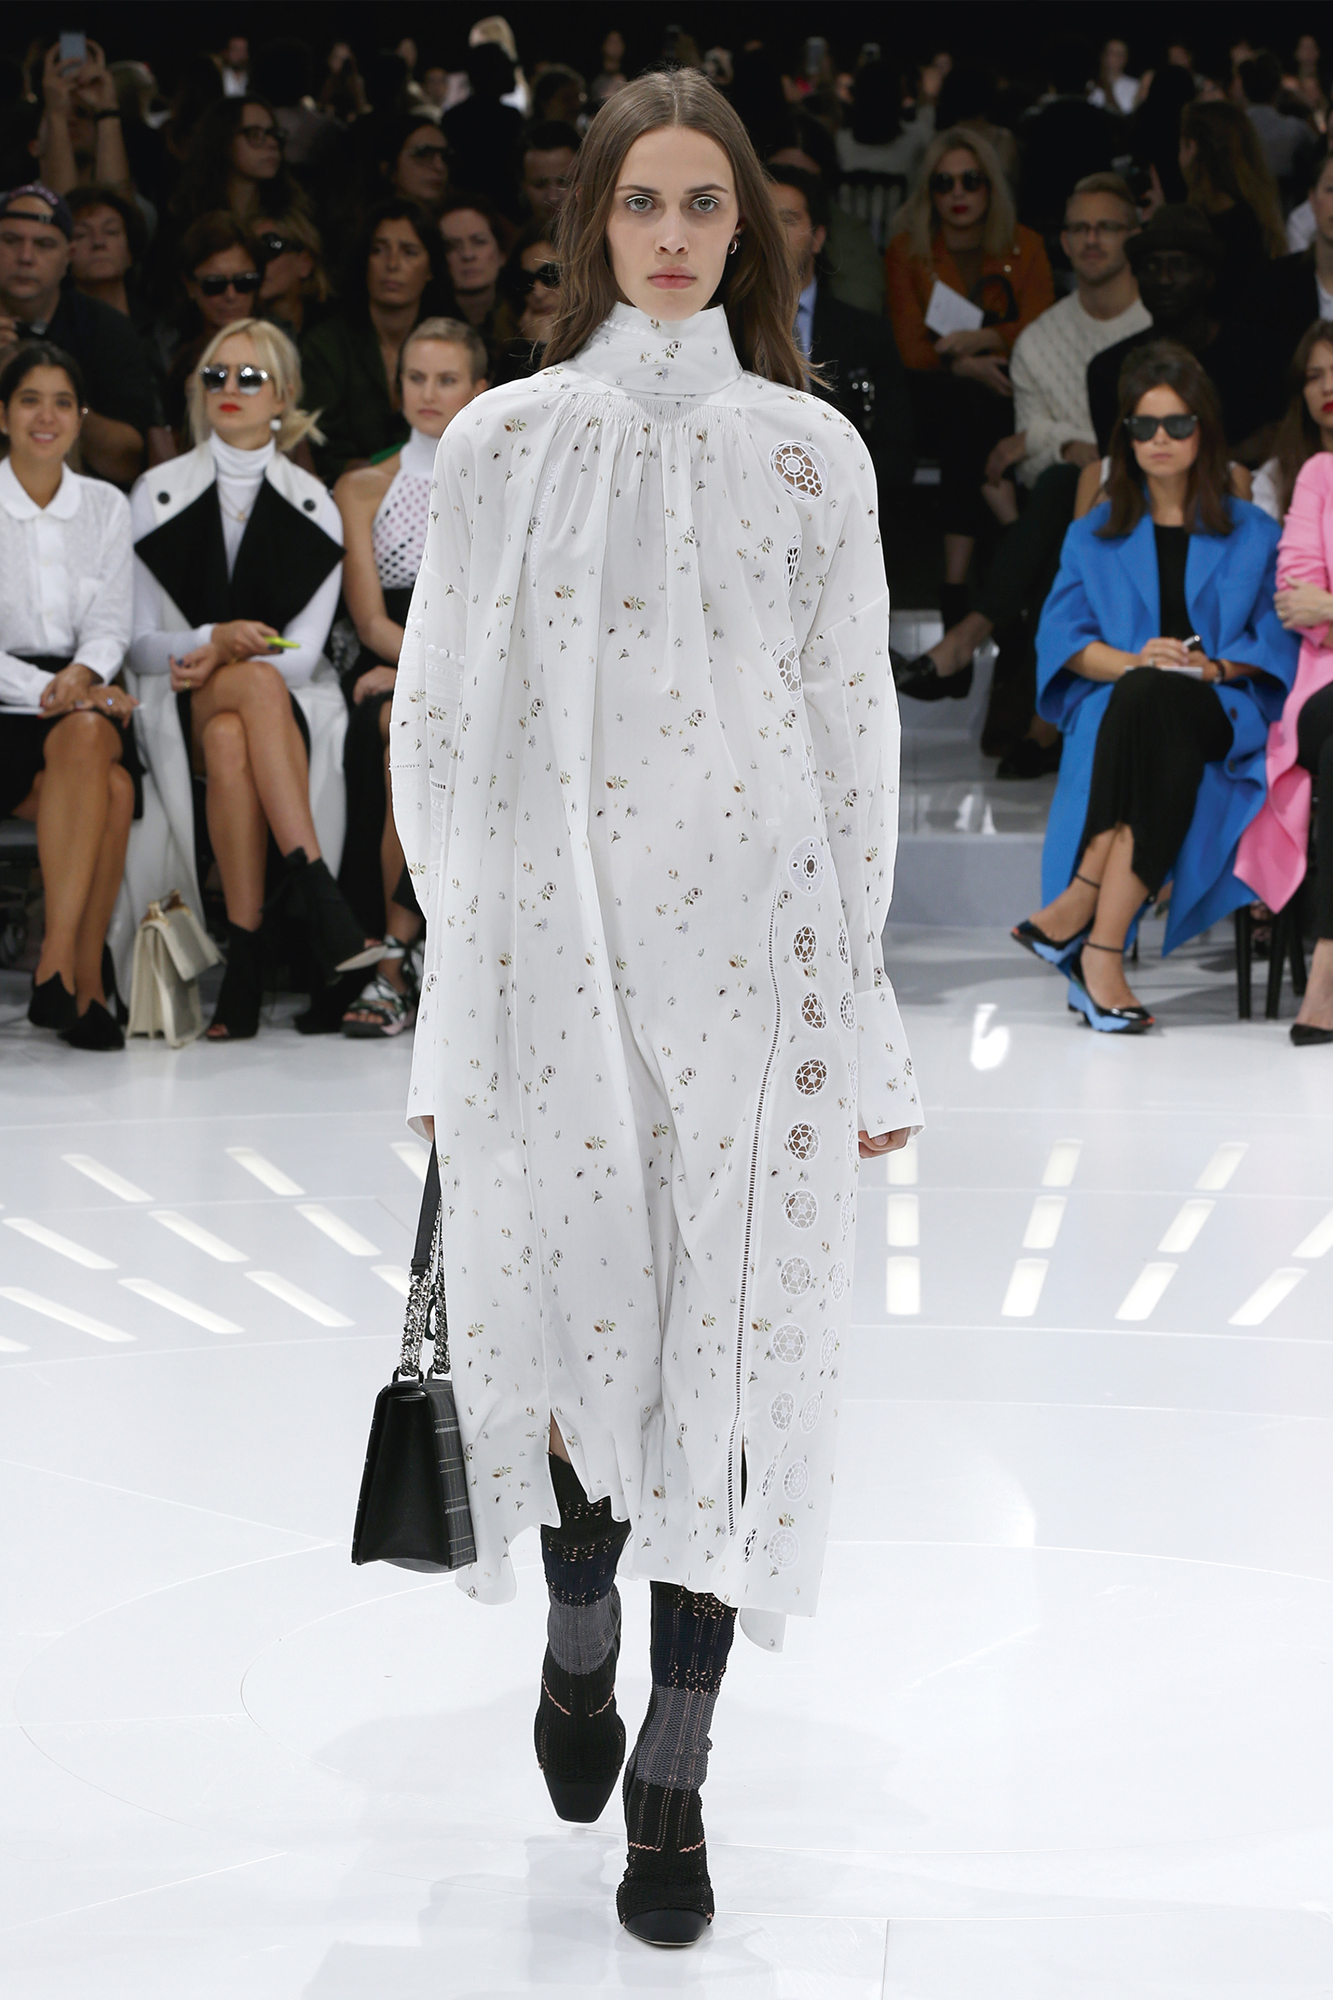 Christian Dior Haute Couture Spring-Summer Ready To Wear Dresses & Accessories Collection 2015-16 (12)